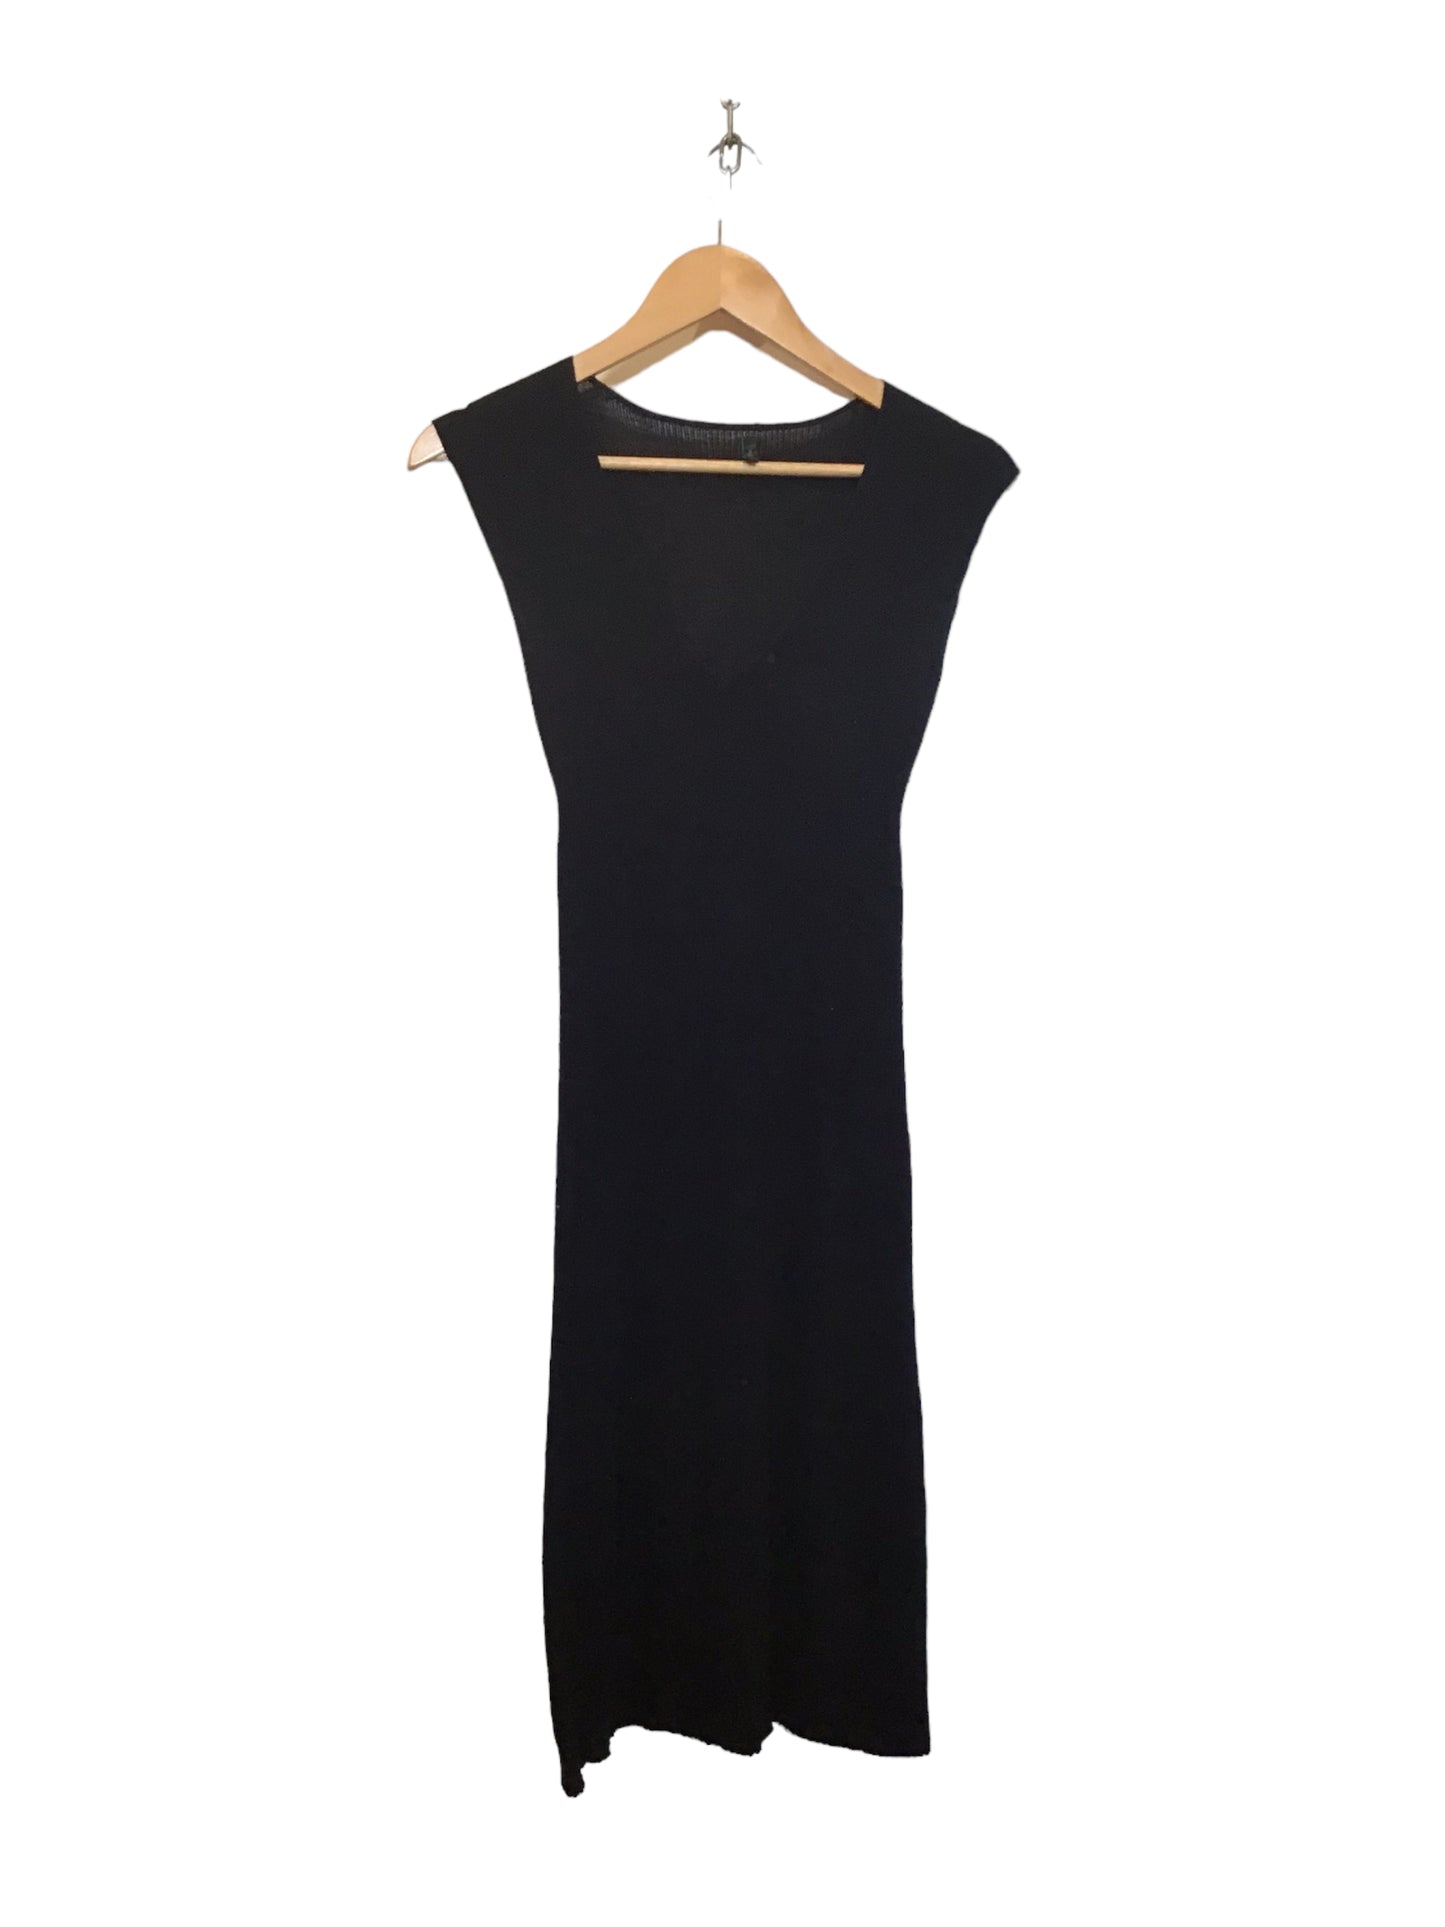 Black Knitted Dress (Size M)